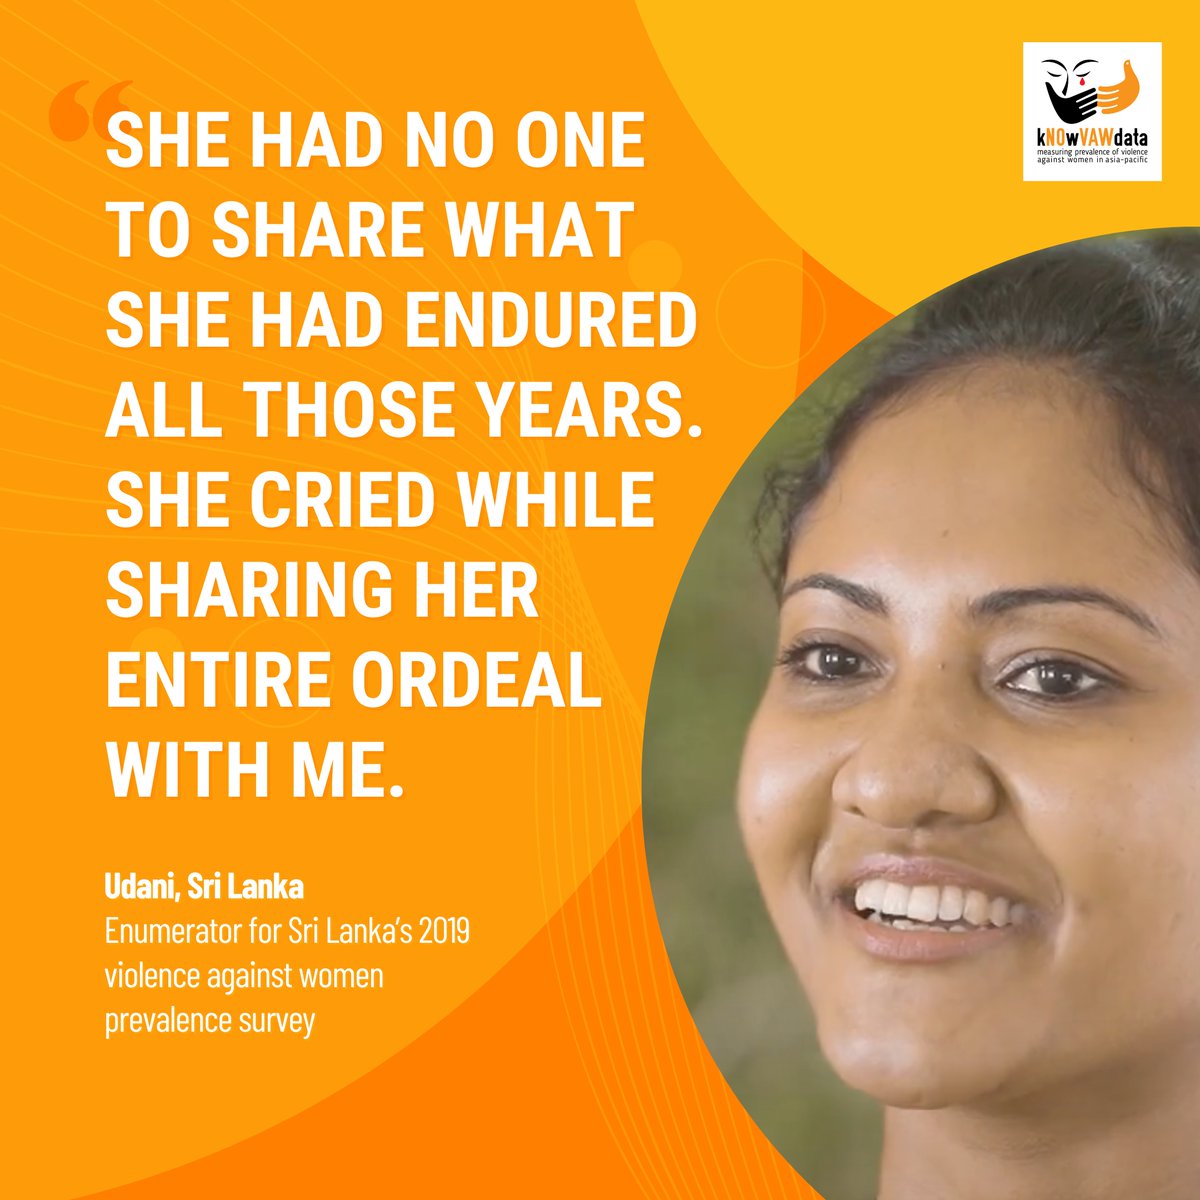 “When I was about to leave, she went on her knees and thanked me.”

Udani shares her story about interviewing women who experienced gender-based violence for #SriLanka’s first national prevalence survey.

asiapacific.unfpa.org/en/news/heartb… 

#16Days
#GenderData
#RespectAndEmpower